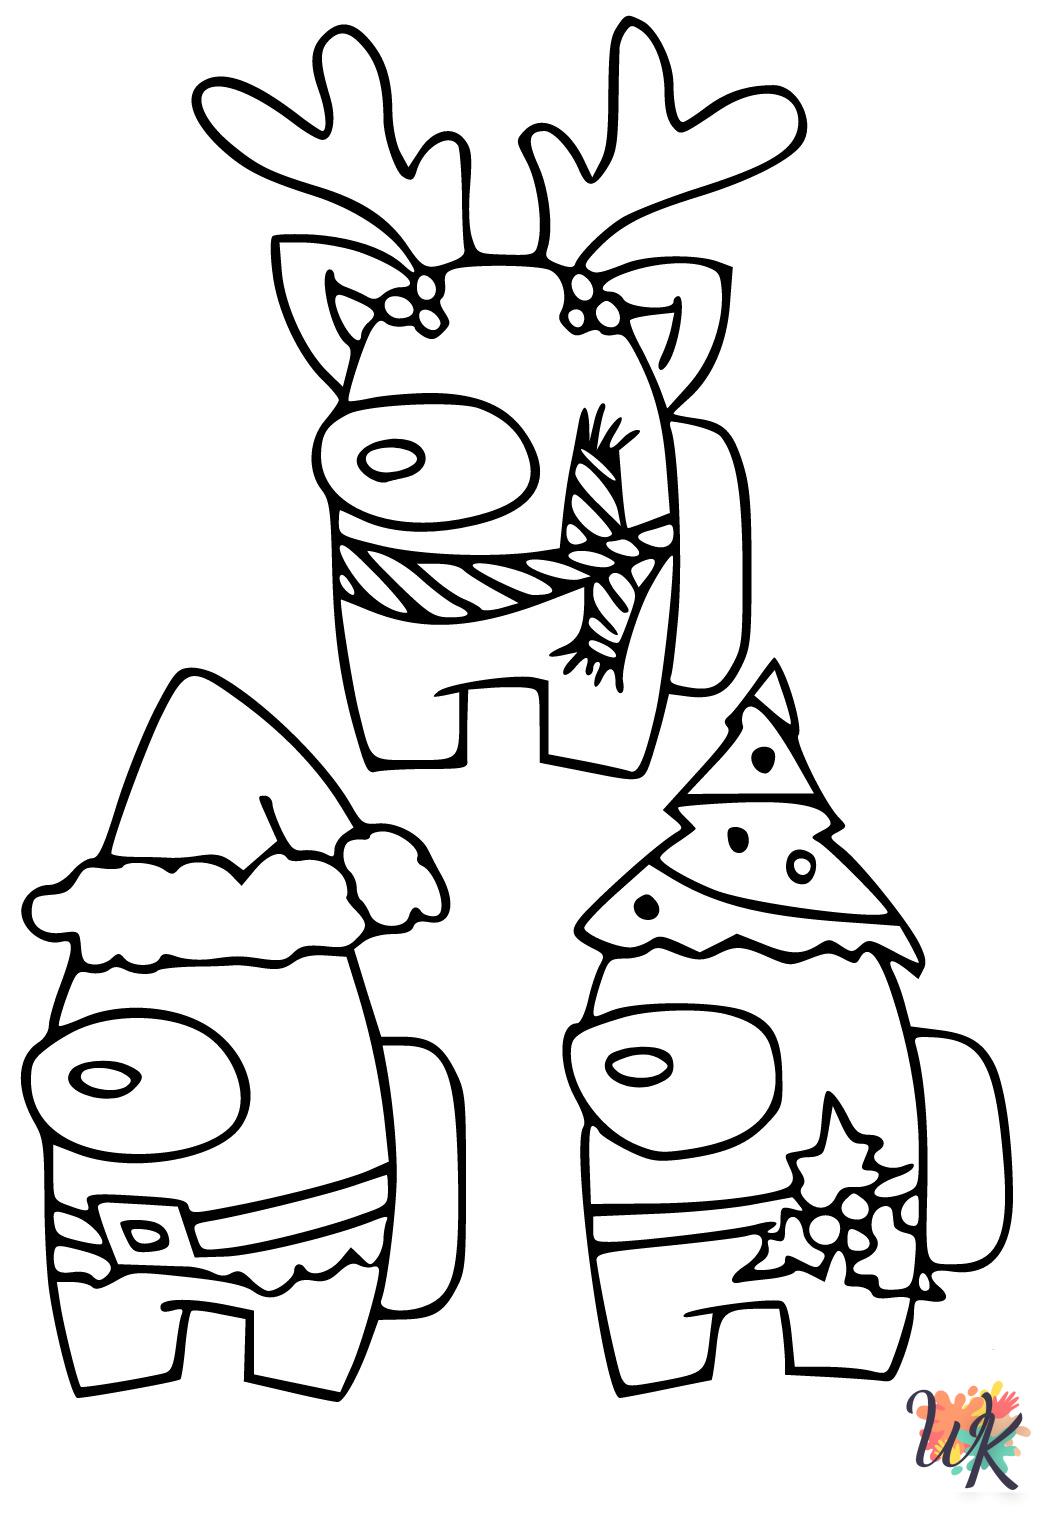 Among Us Christmas coloring pages for preschoolers